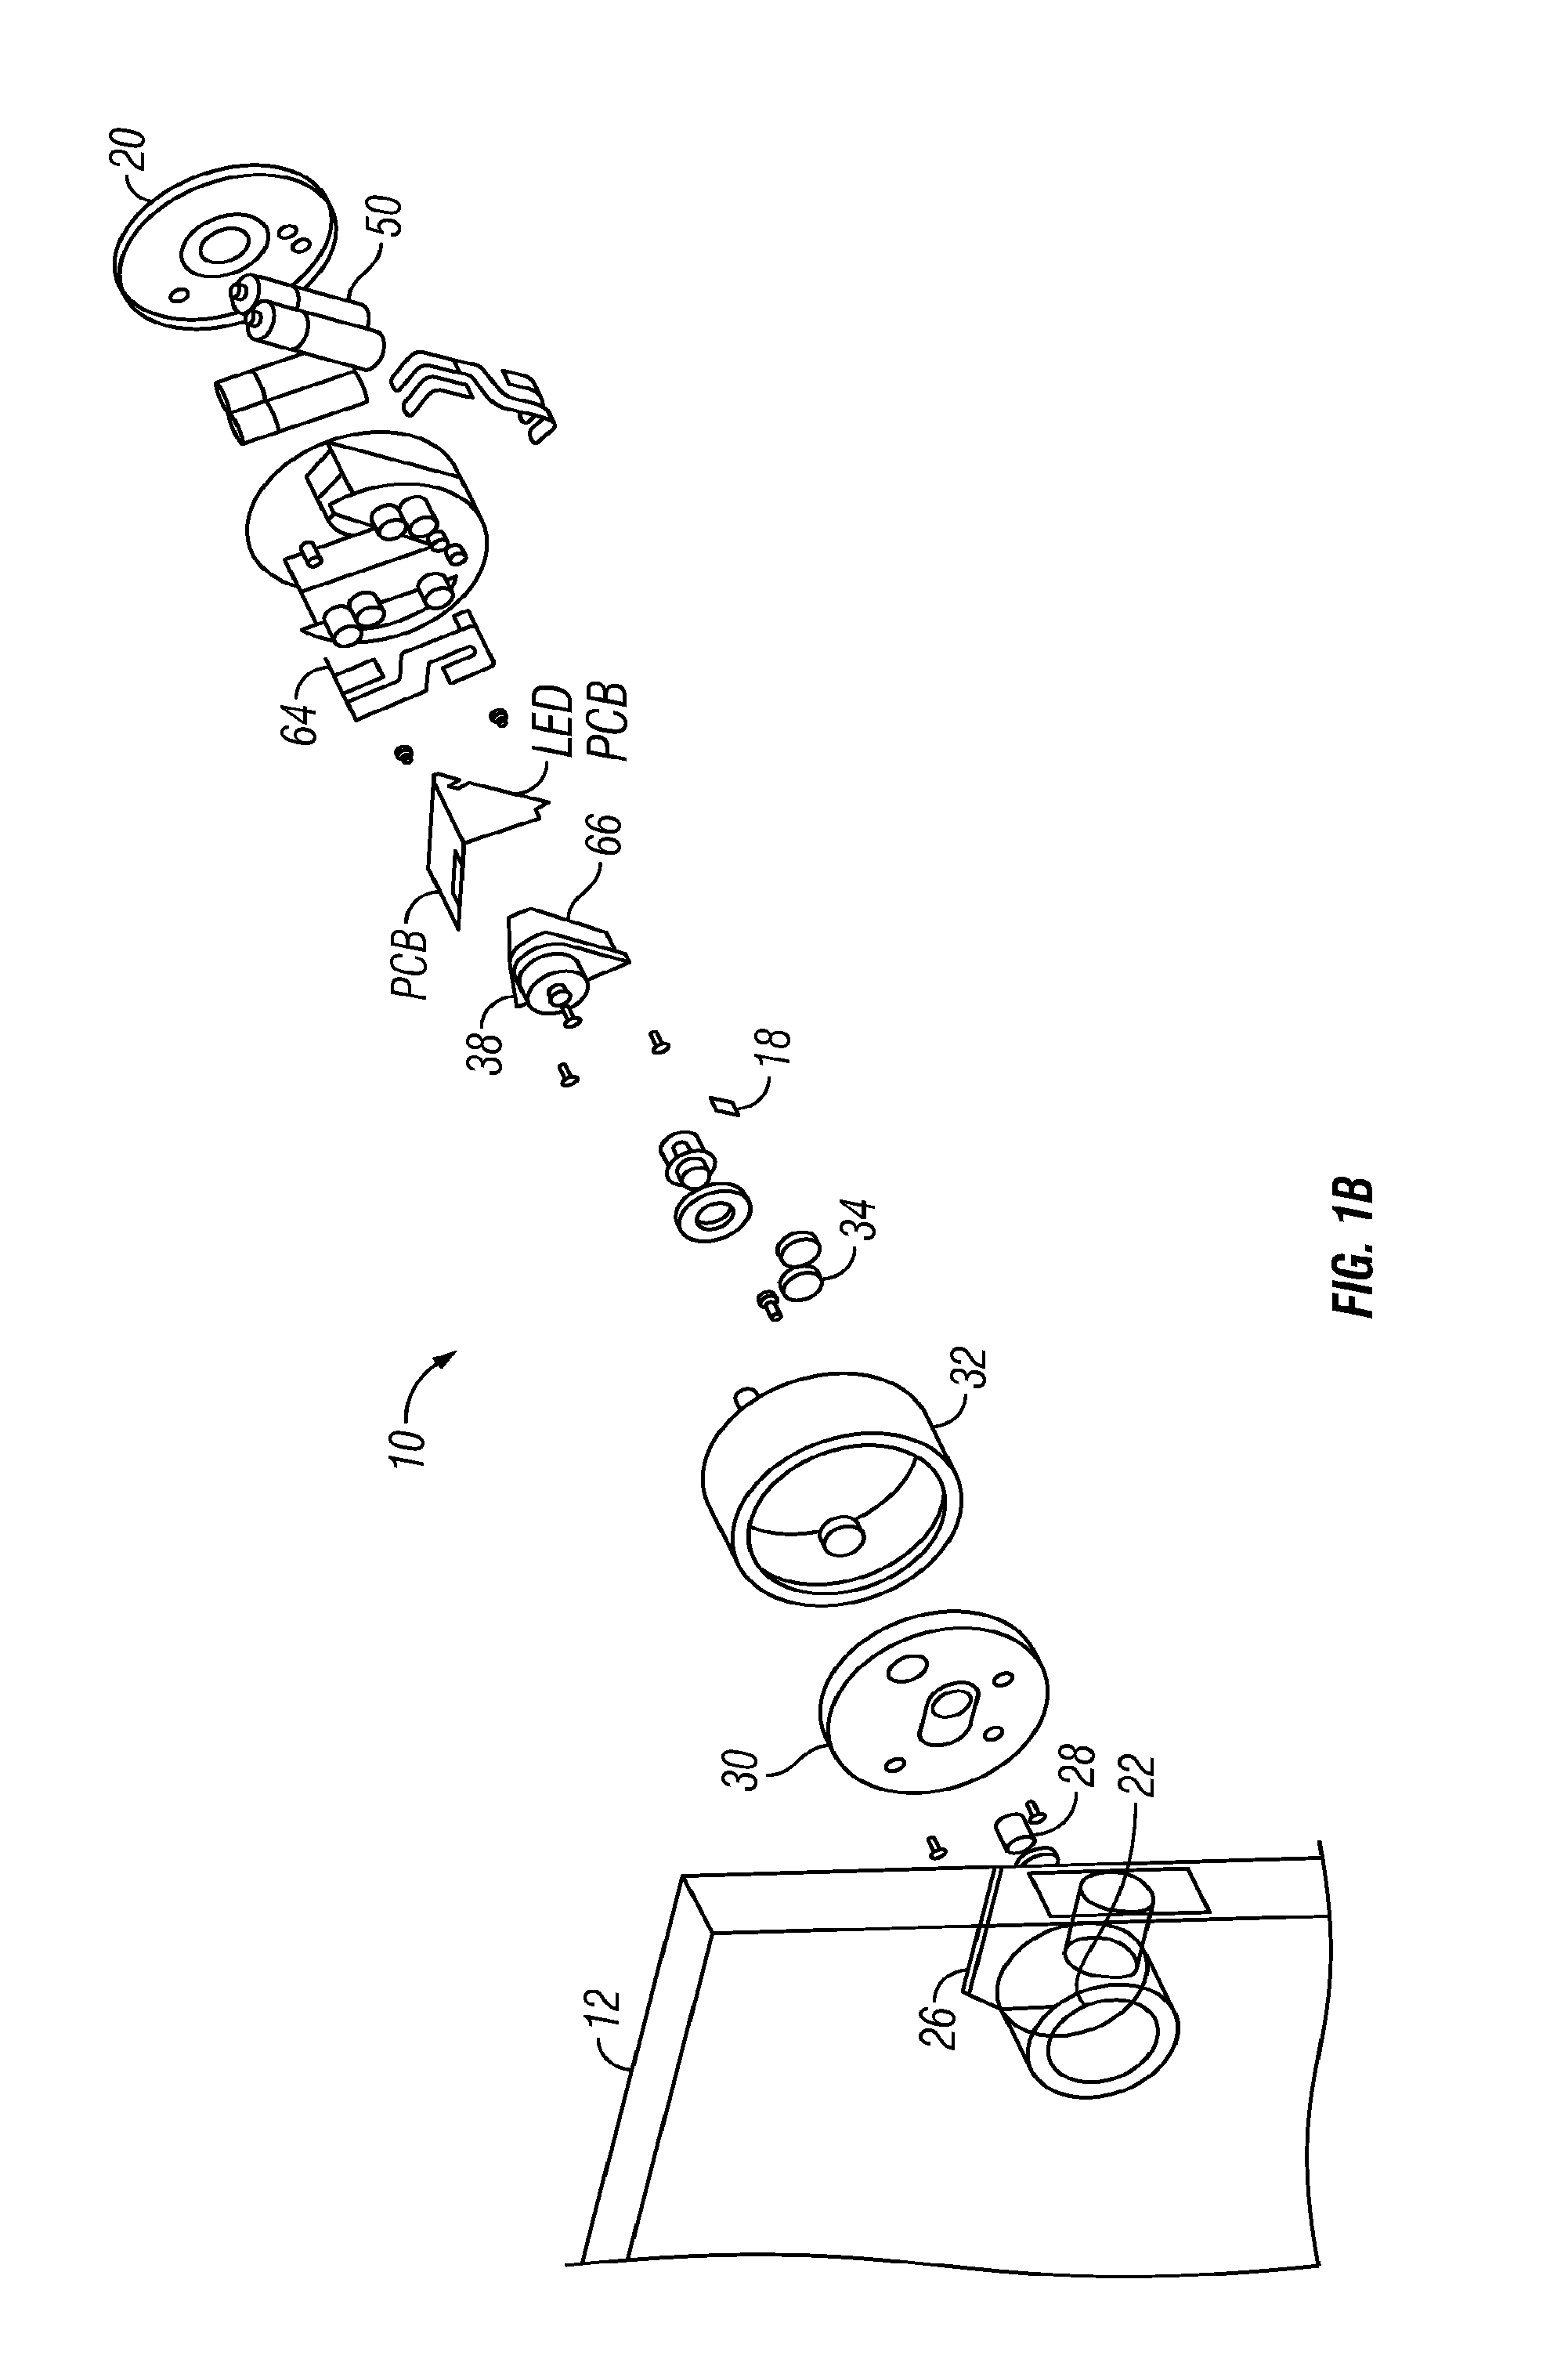 Wireless access control system and methods for intelligent door lock system